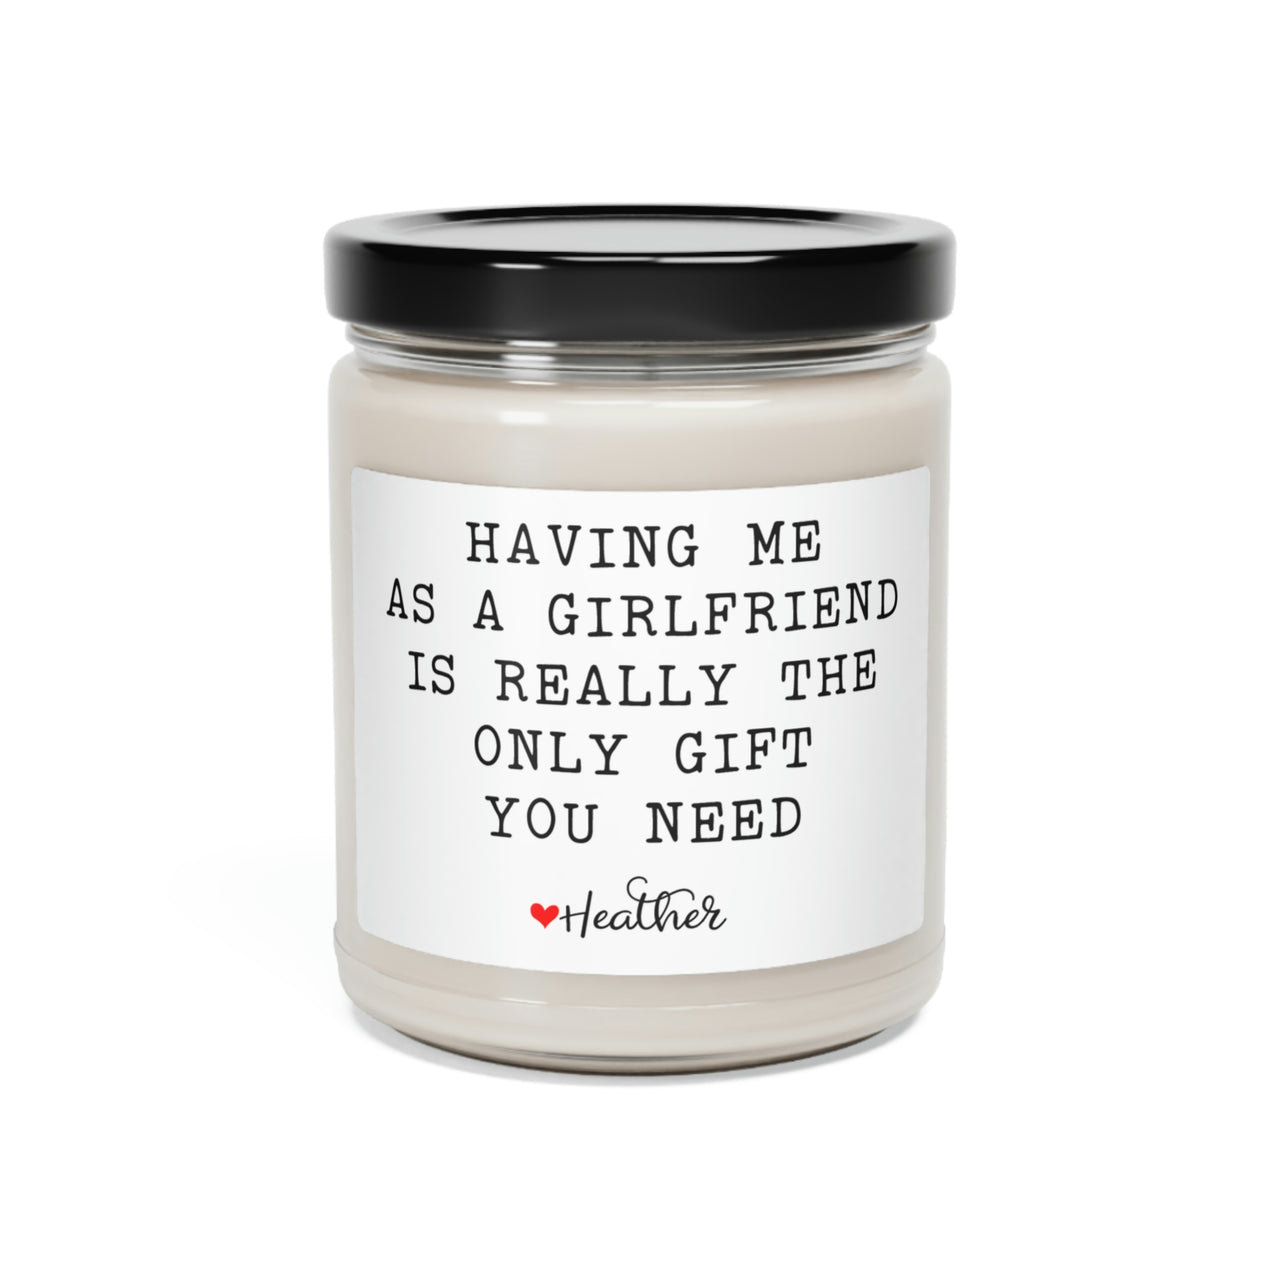 Having Me as a Girlfriend is Really the Only Gift You Need - Scented Soy Candle Gift for Boyfriend